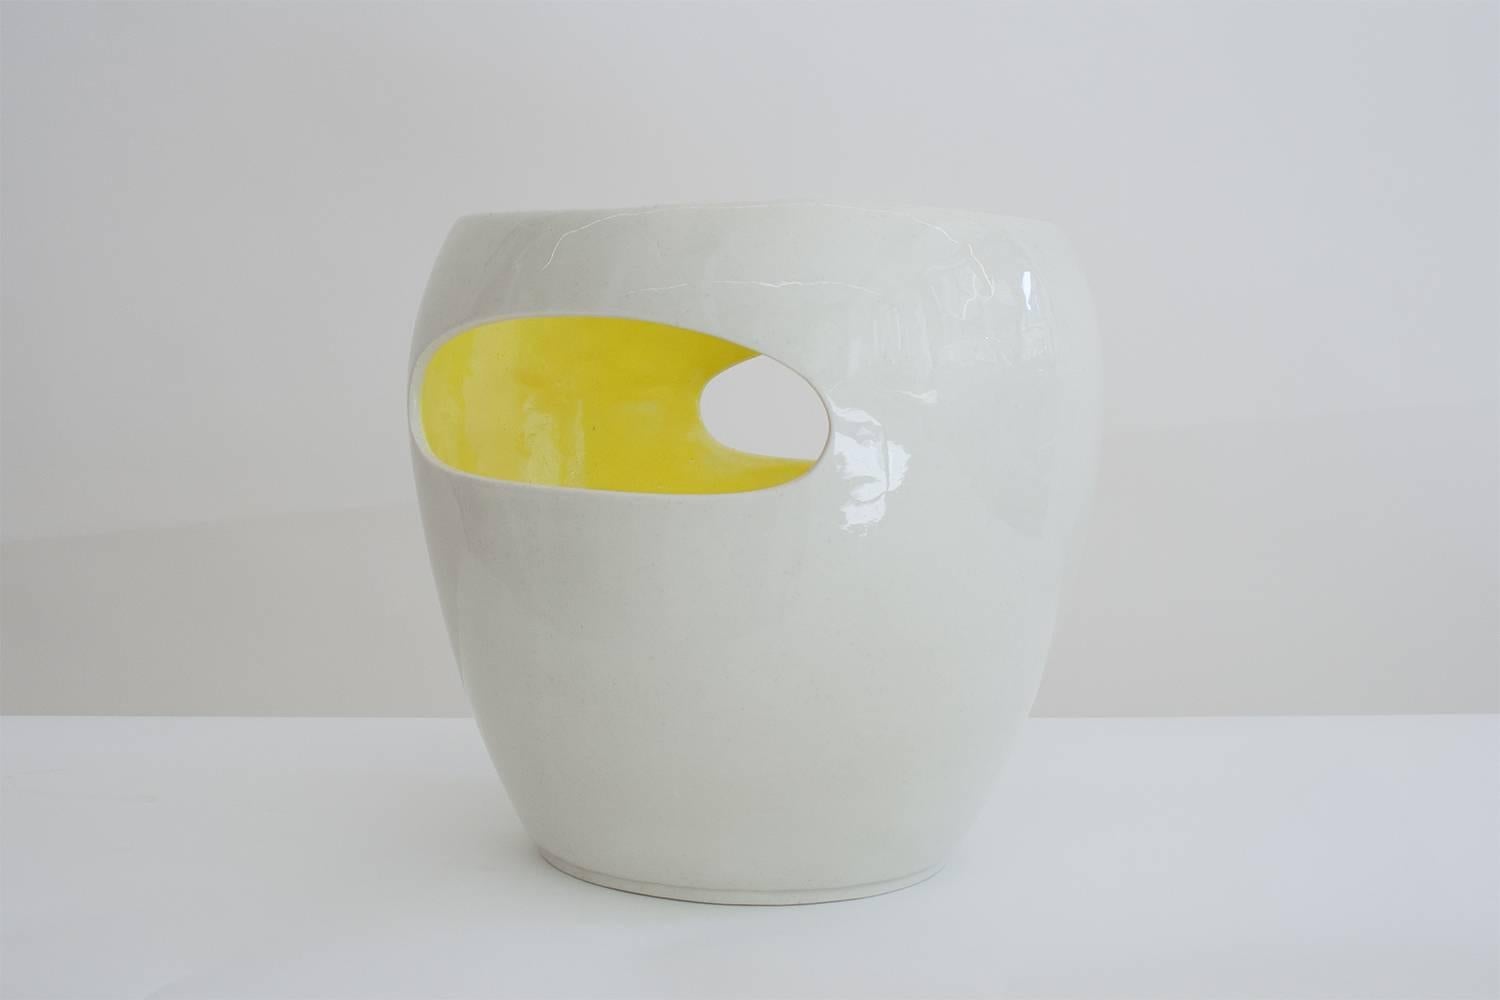 Porcelain vase with bright yellow enameled interior.
Handmade.
One of a kind in this shade of yellow.
Stamped on the bottom.